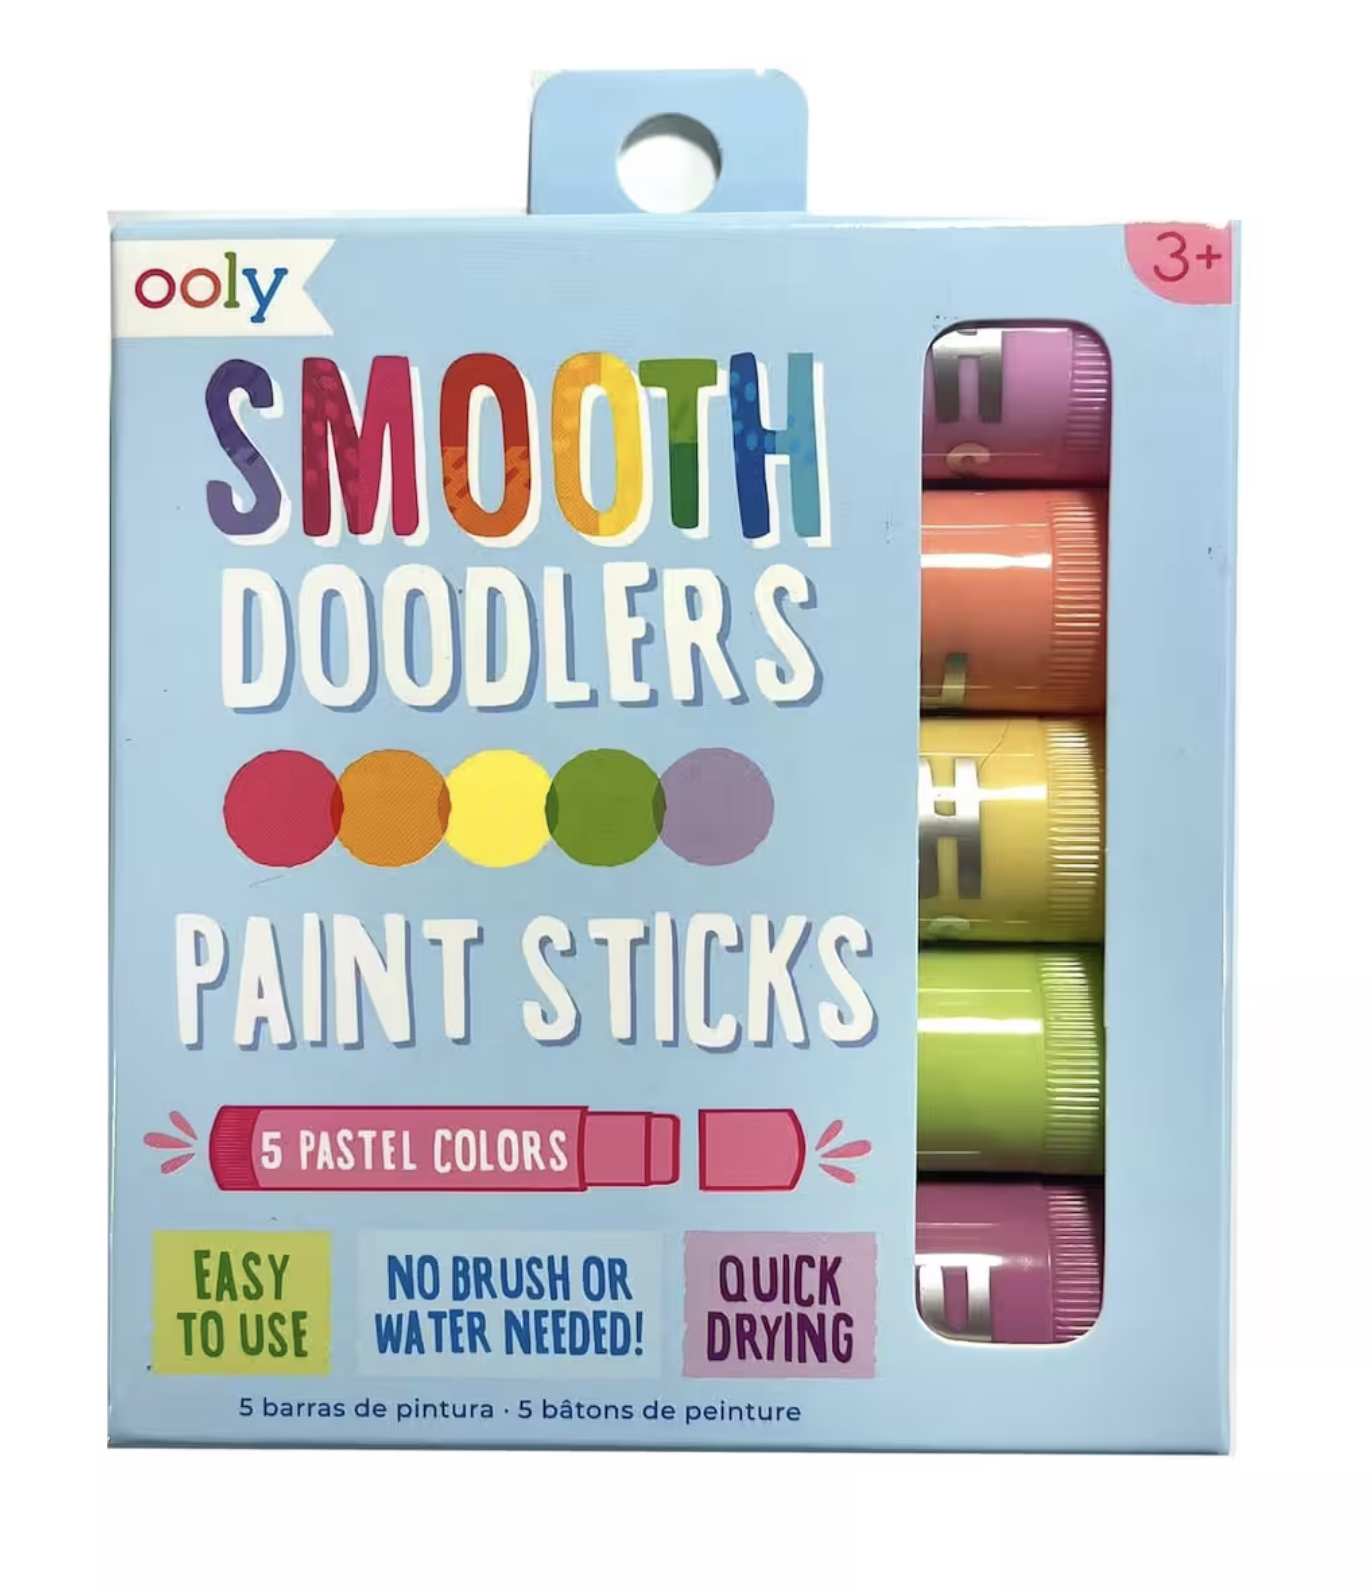 Ooly Smooth Doodlers Paint Sticks